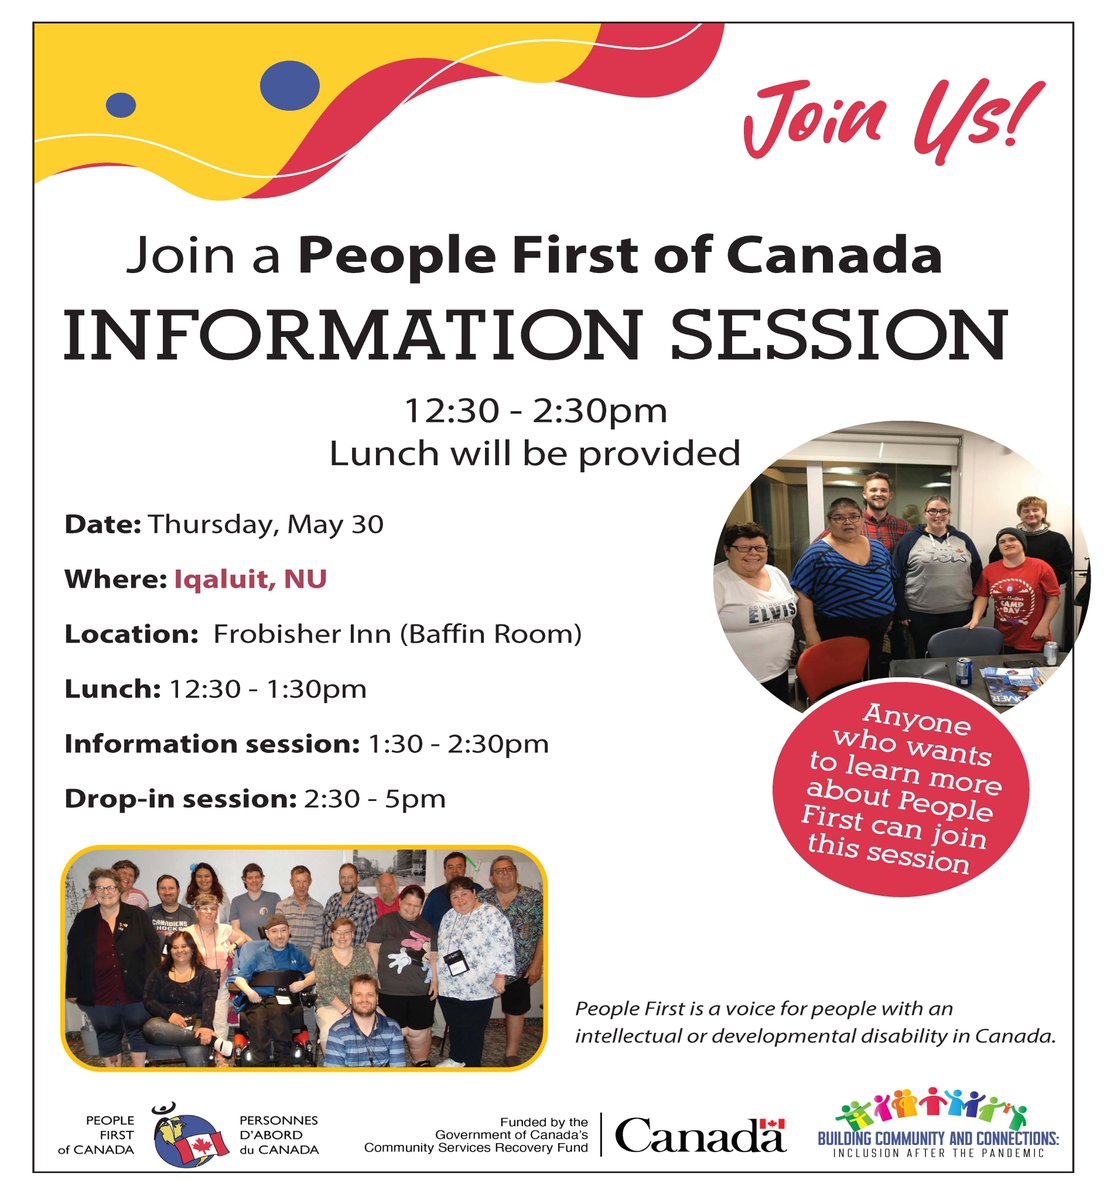 The PFC Roadshow is heading north! If you are in Iqaluit, mark your calendar for May 30 for a PFC Info Session. Details are below and at peoplefirstofcanada.ca/infosessions